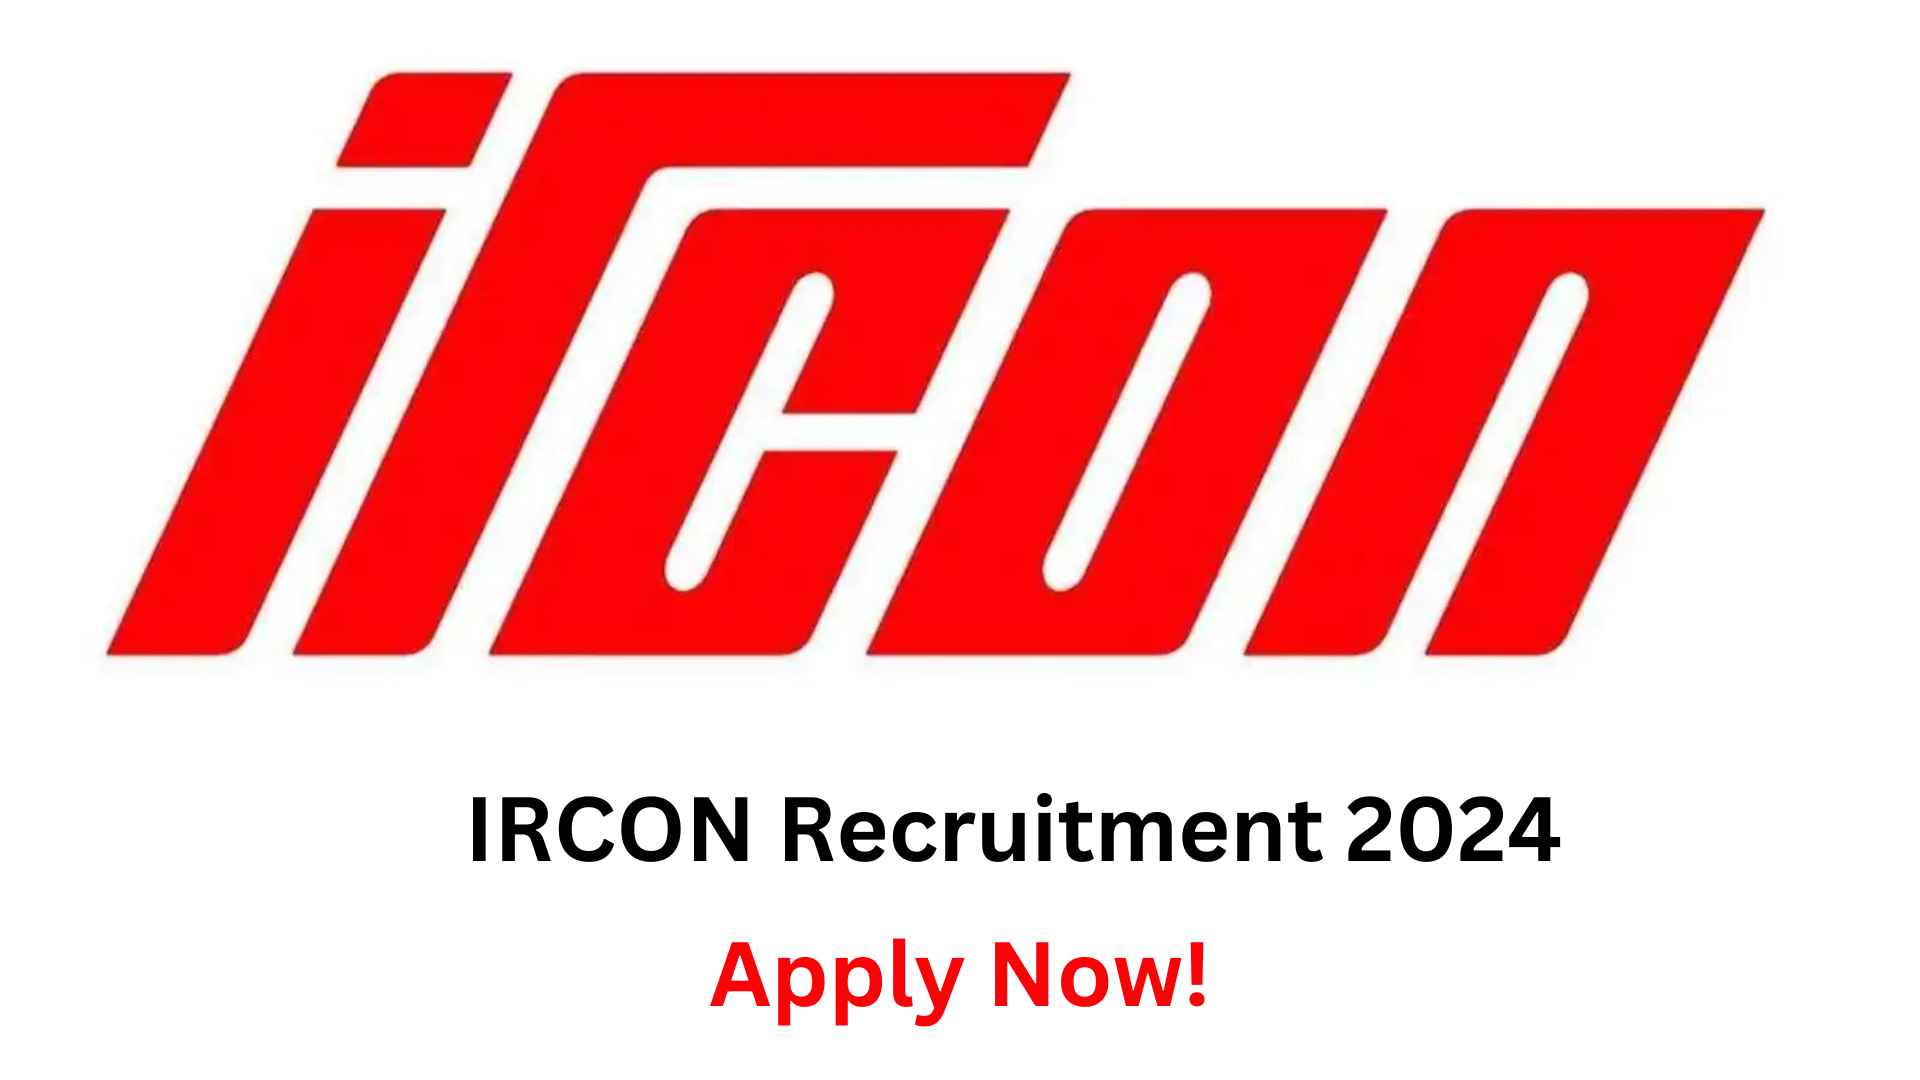 IRCON Chief General Manager Recruitment 2024, Apply Now, Salary Up To 1,44,200, Check Details, Eligibility Criteria